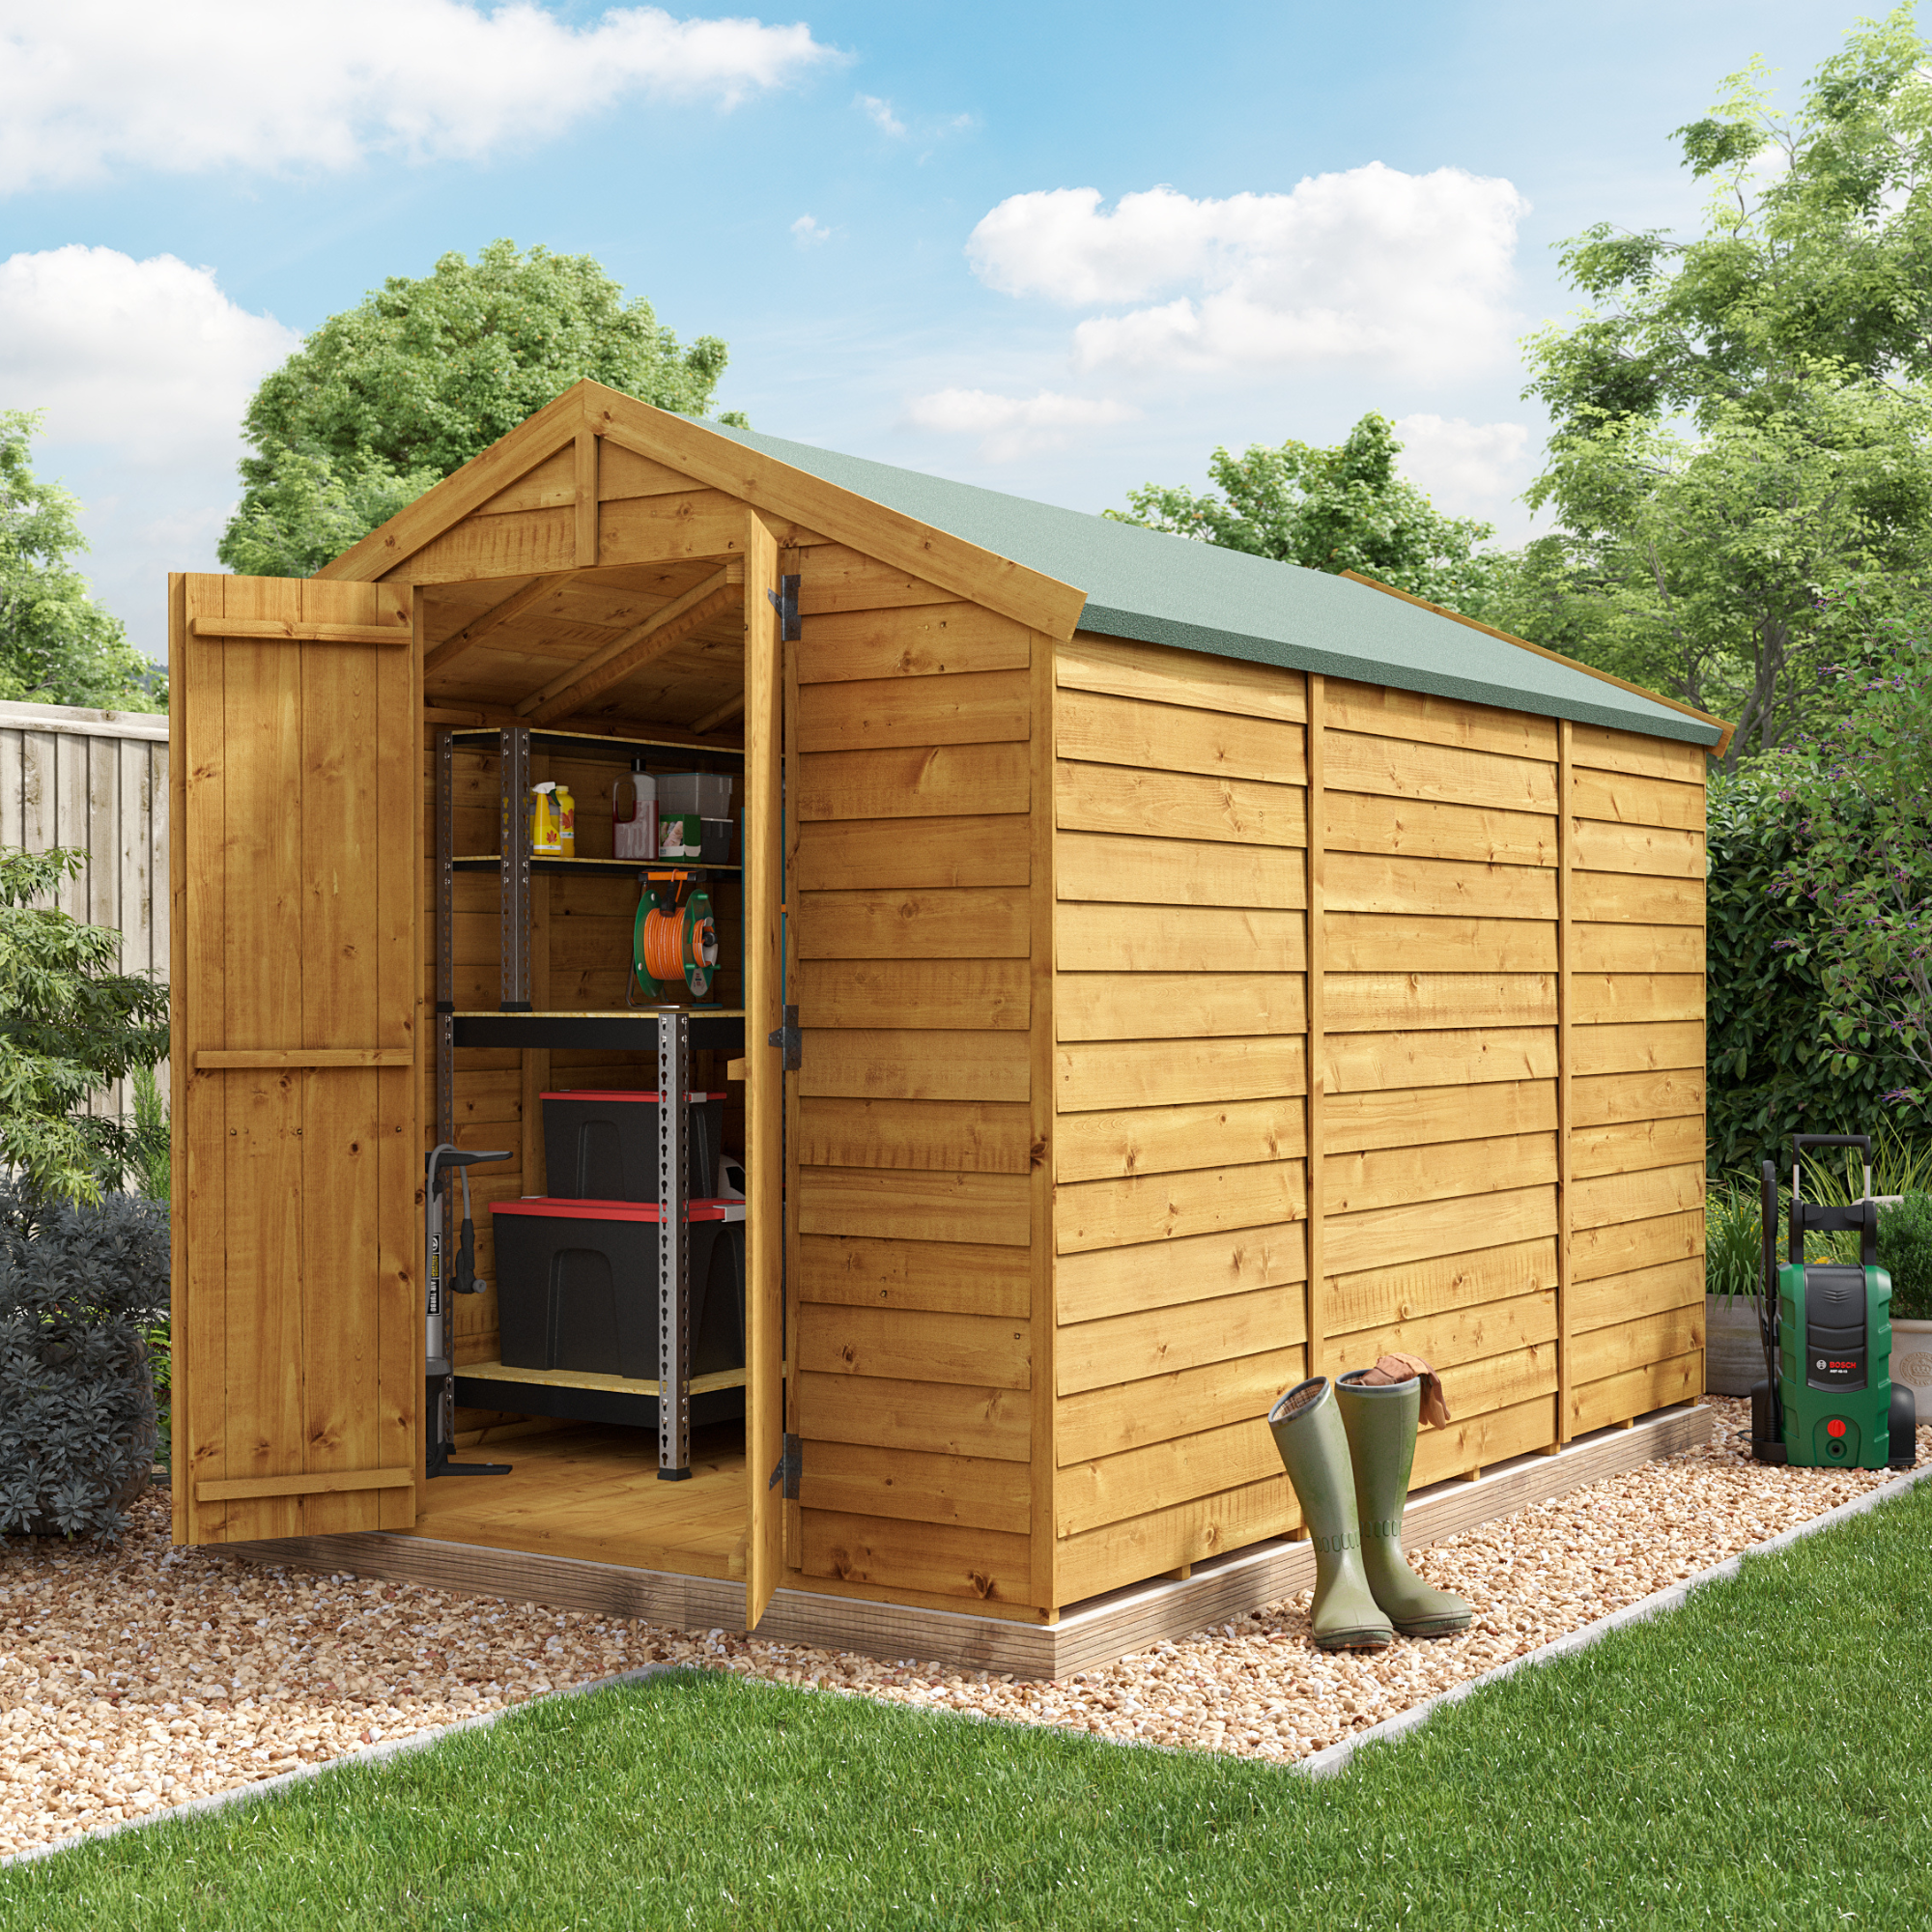 10 x 6 Shed - BillyOh Keeper Overlap Apex Wooden Shed - Windowless 10x6 Garden Shed